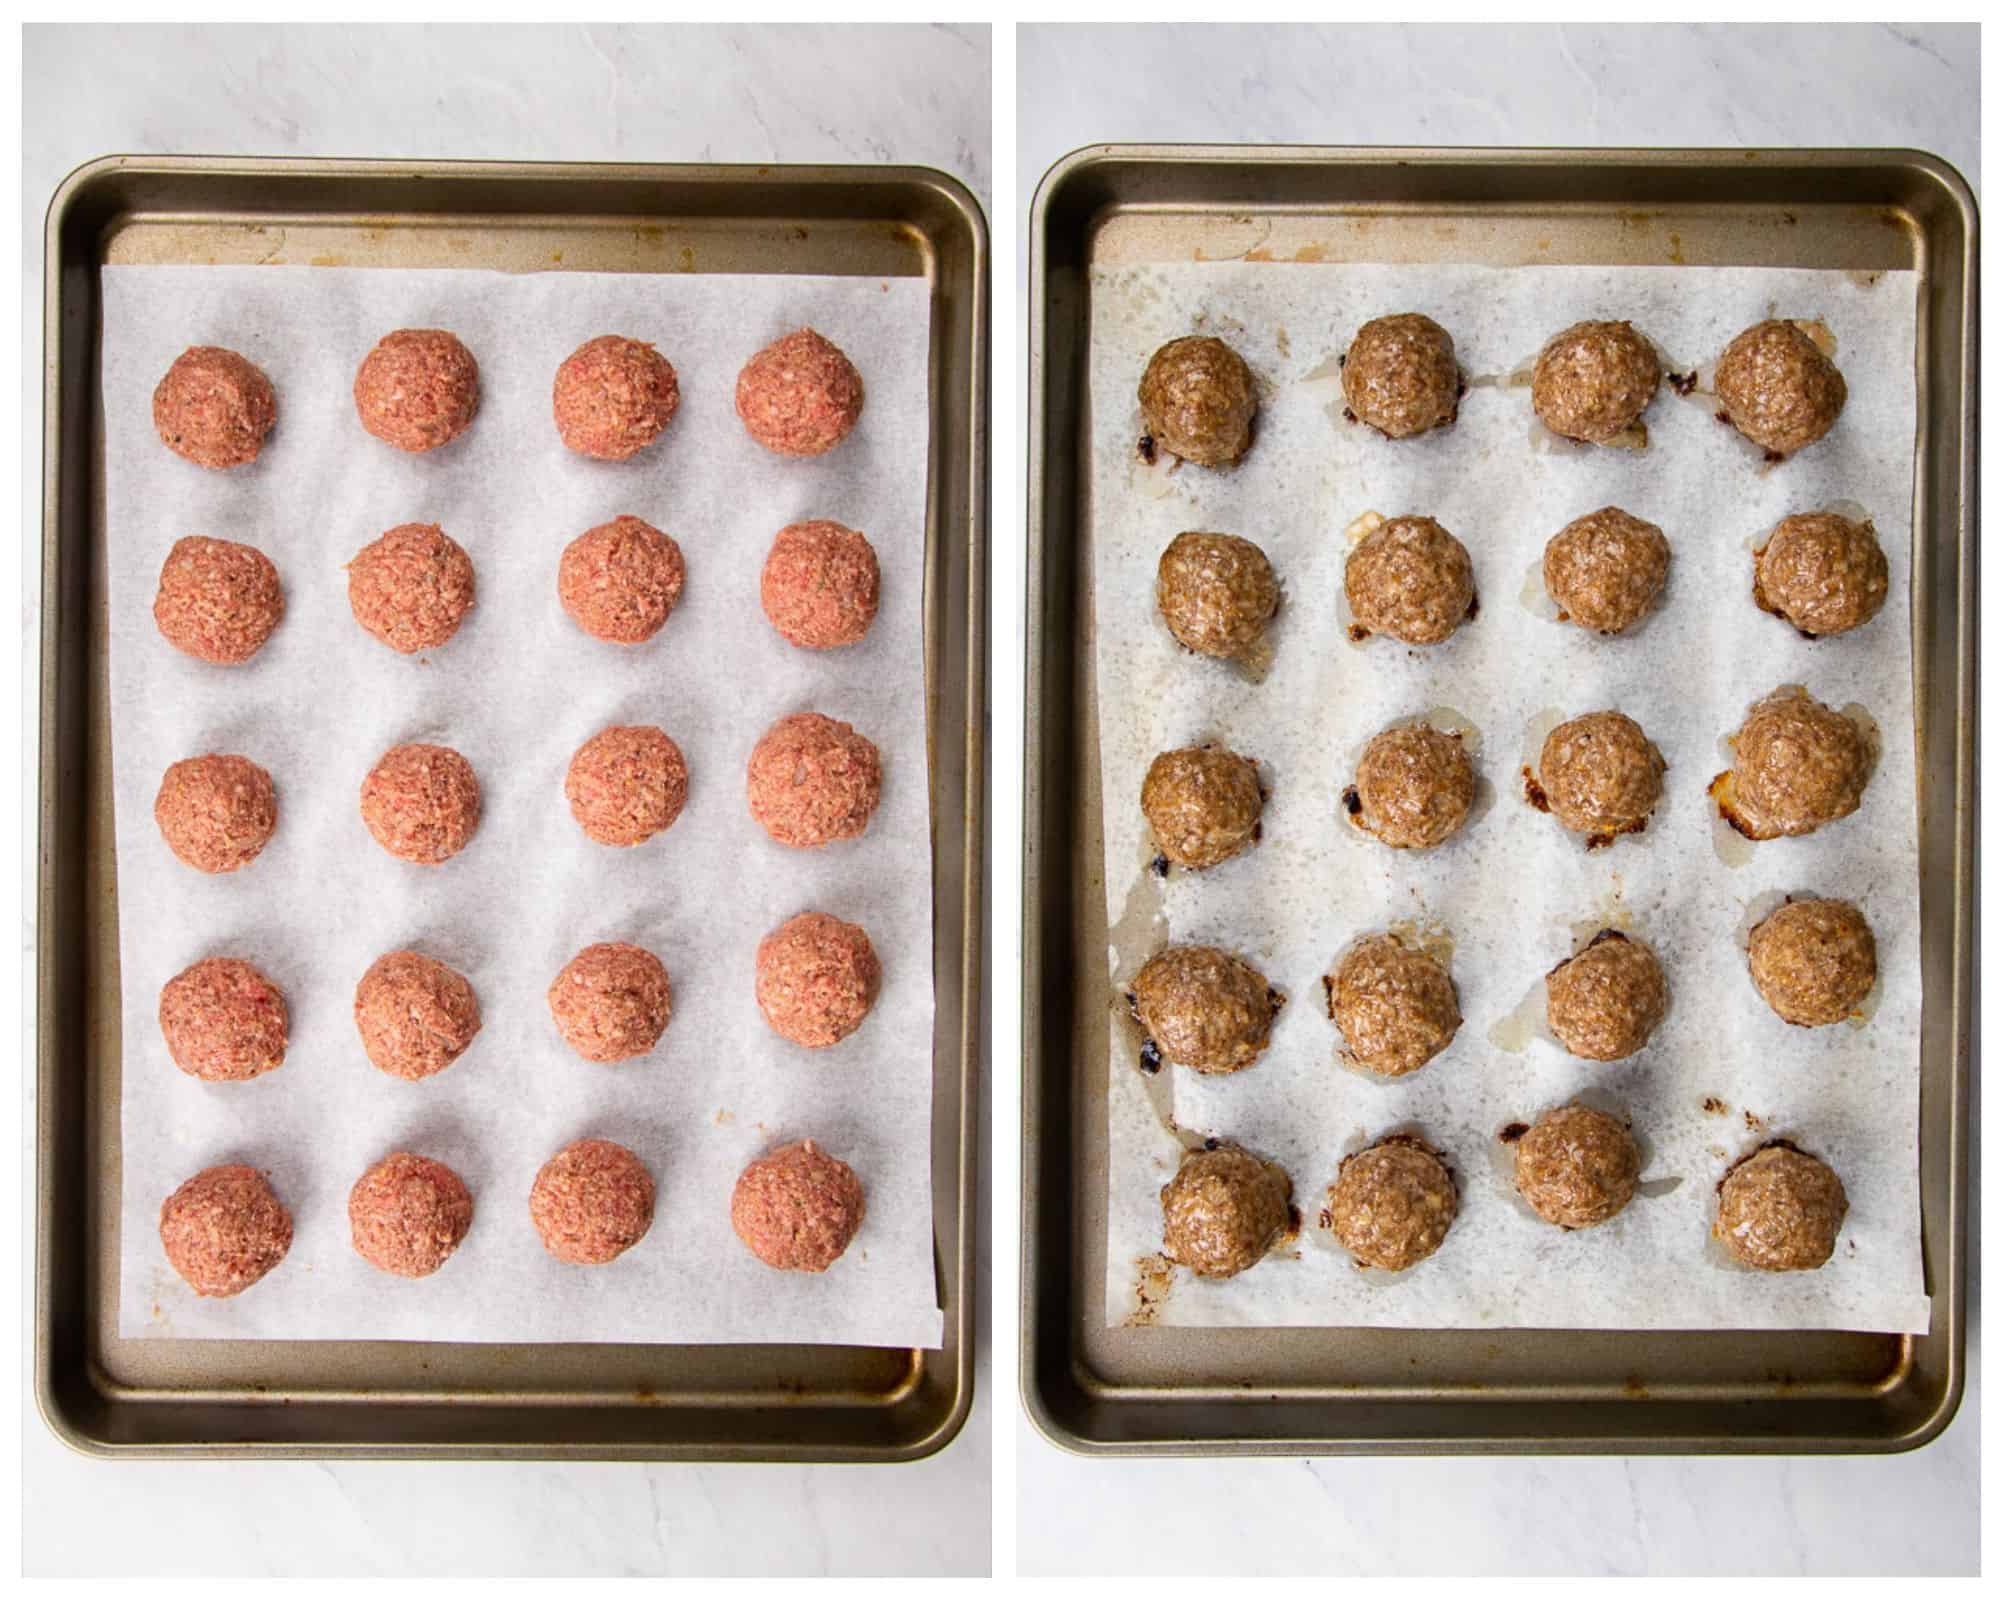 Process photos of how to make Oven Baked Meatballs.